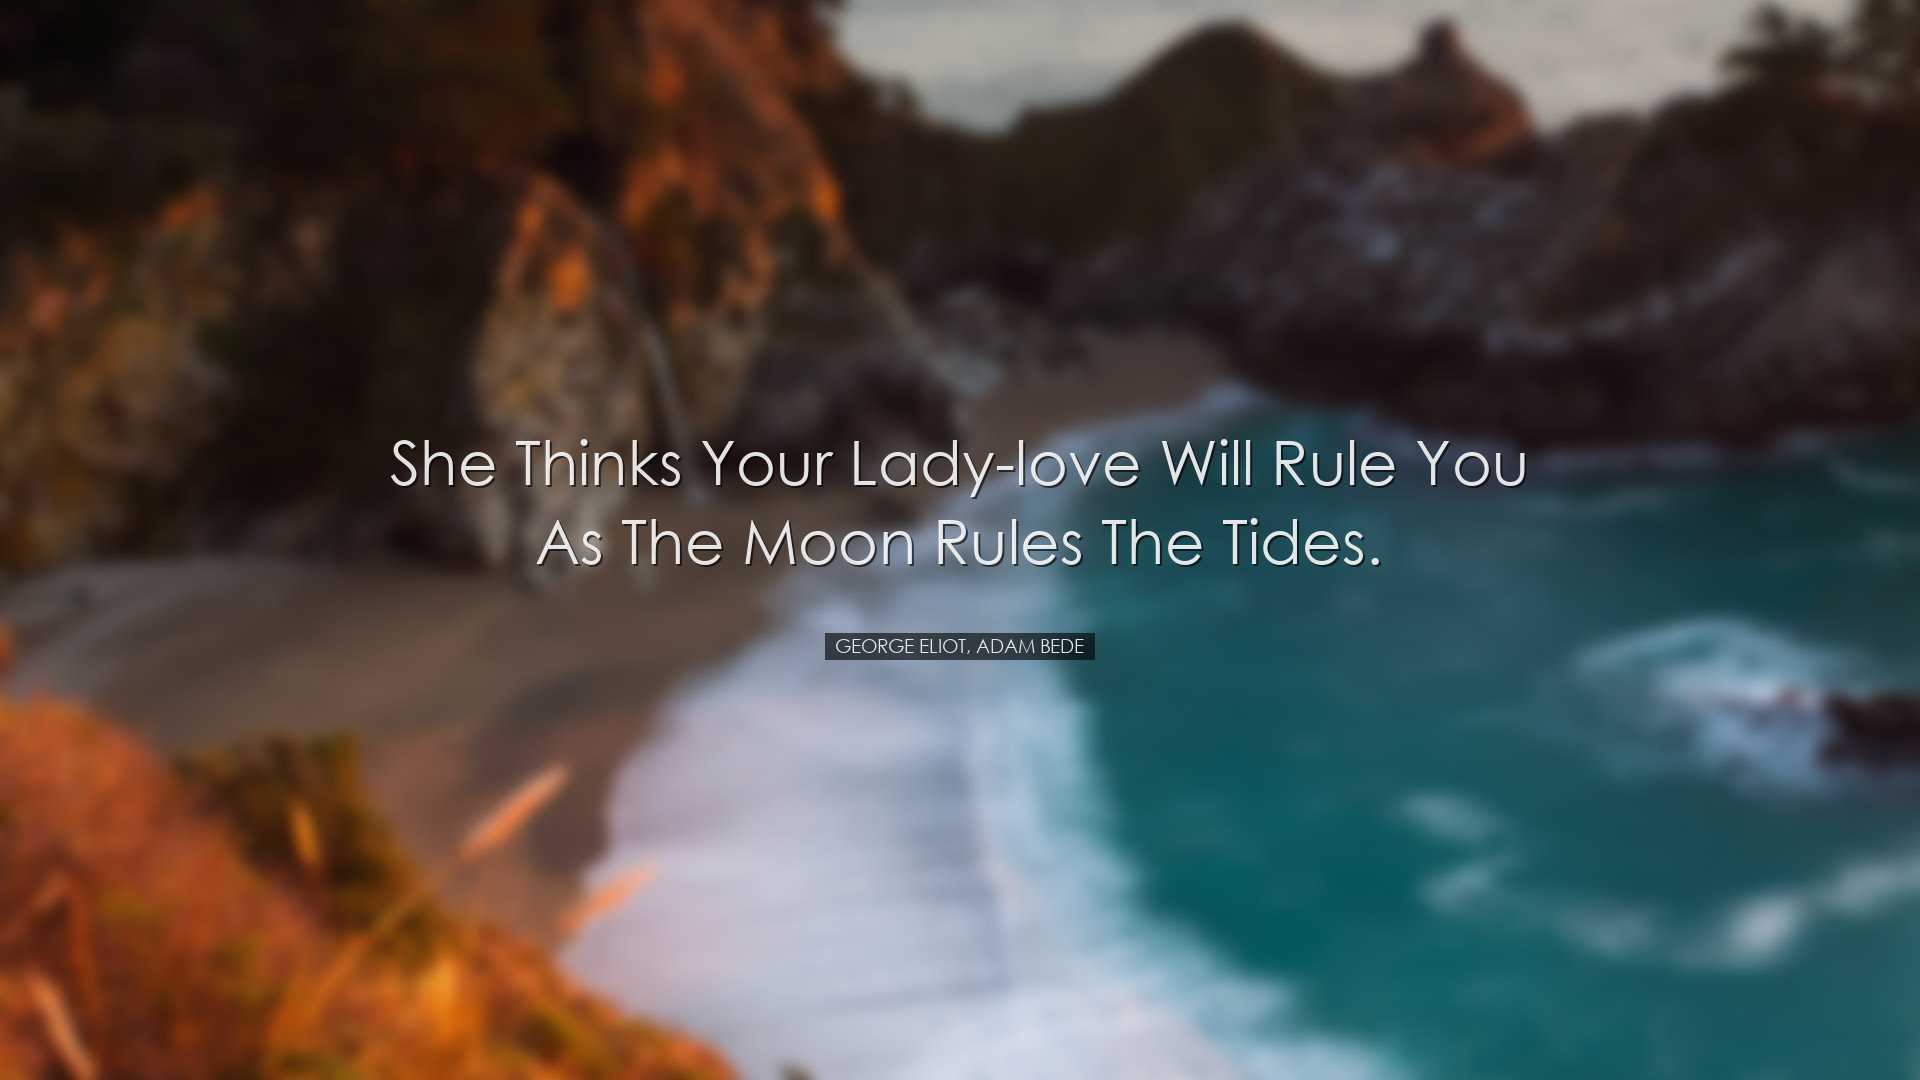 She thinks your lady-love will rule you as the moon rules the tide